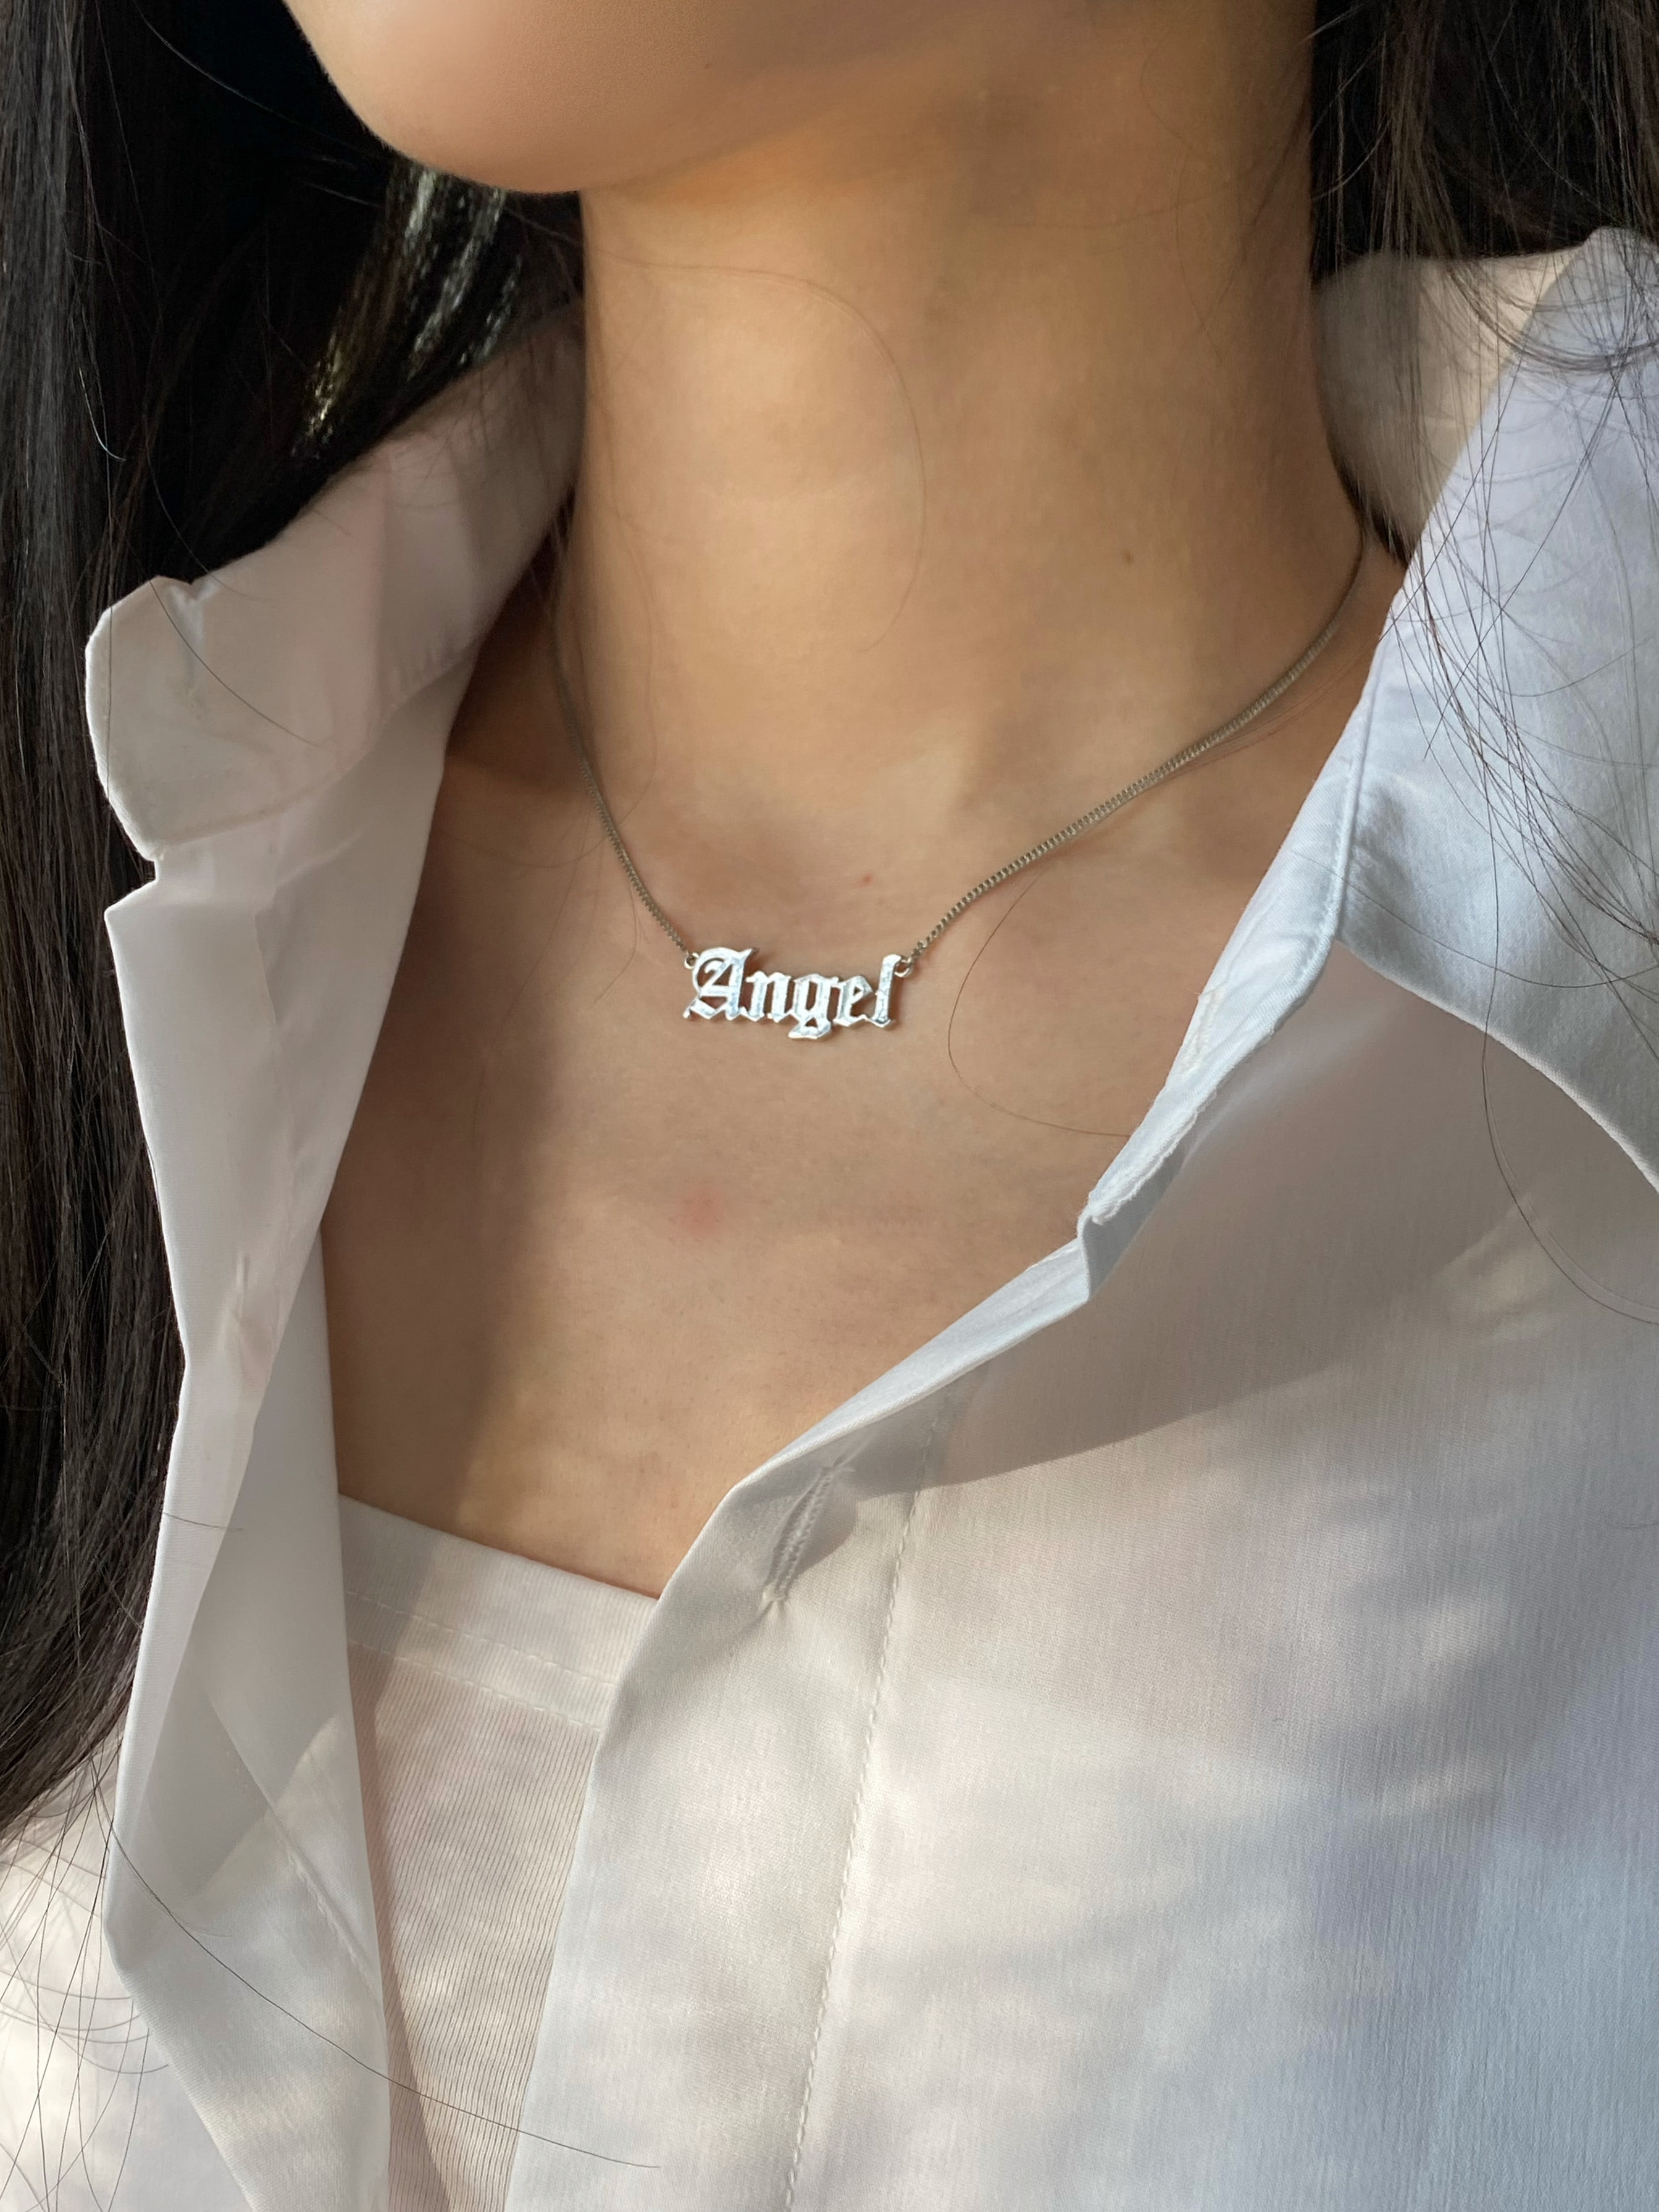 angel lettering necklace